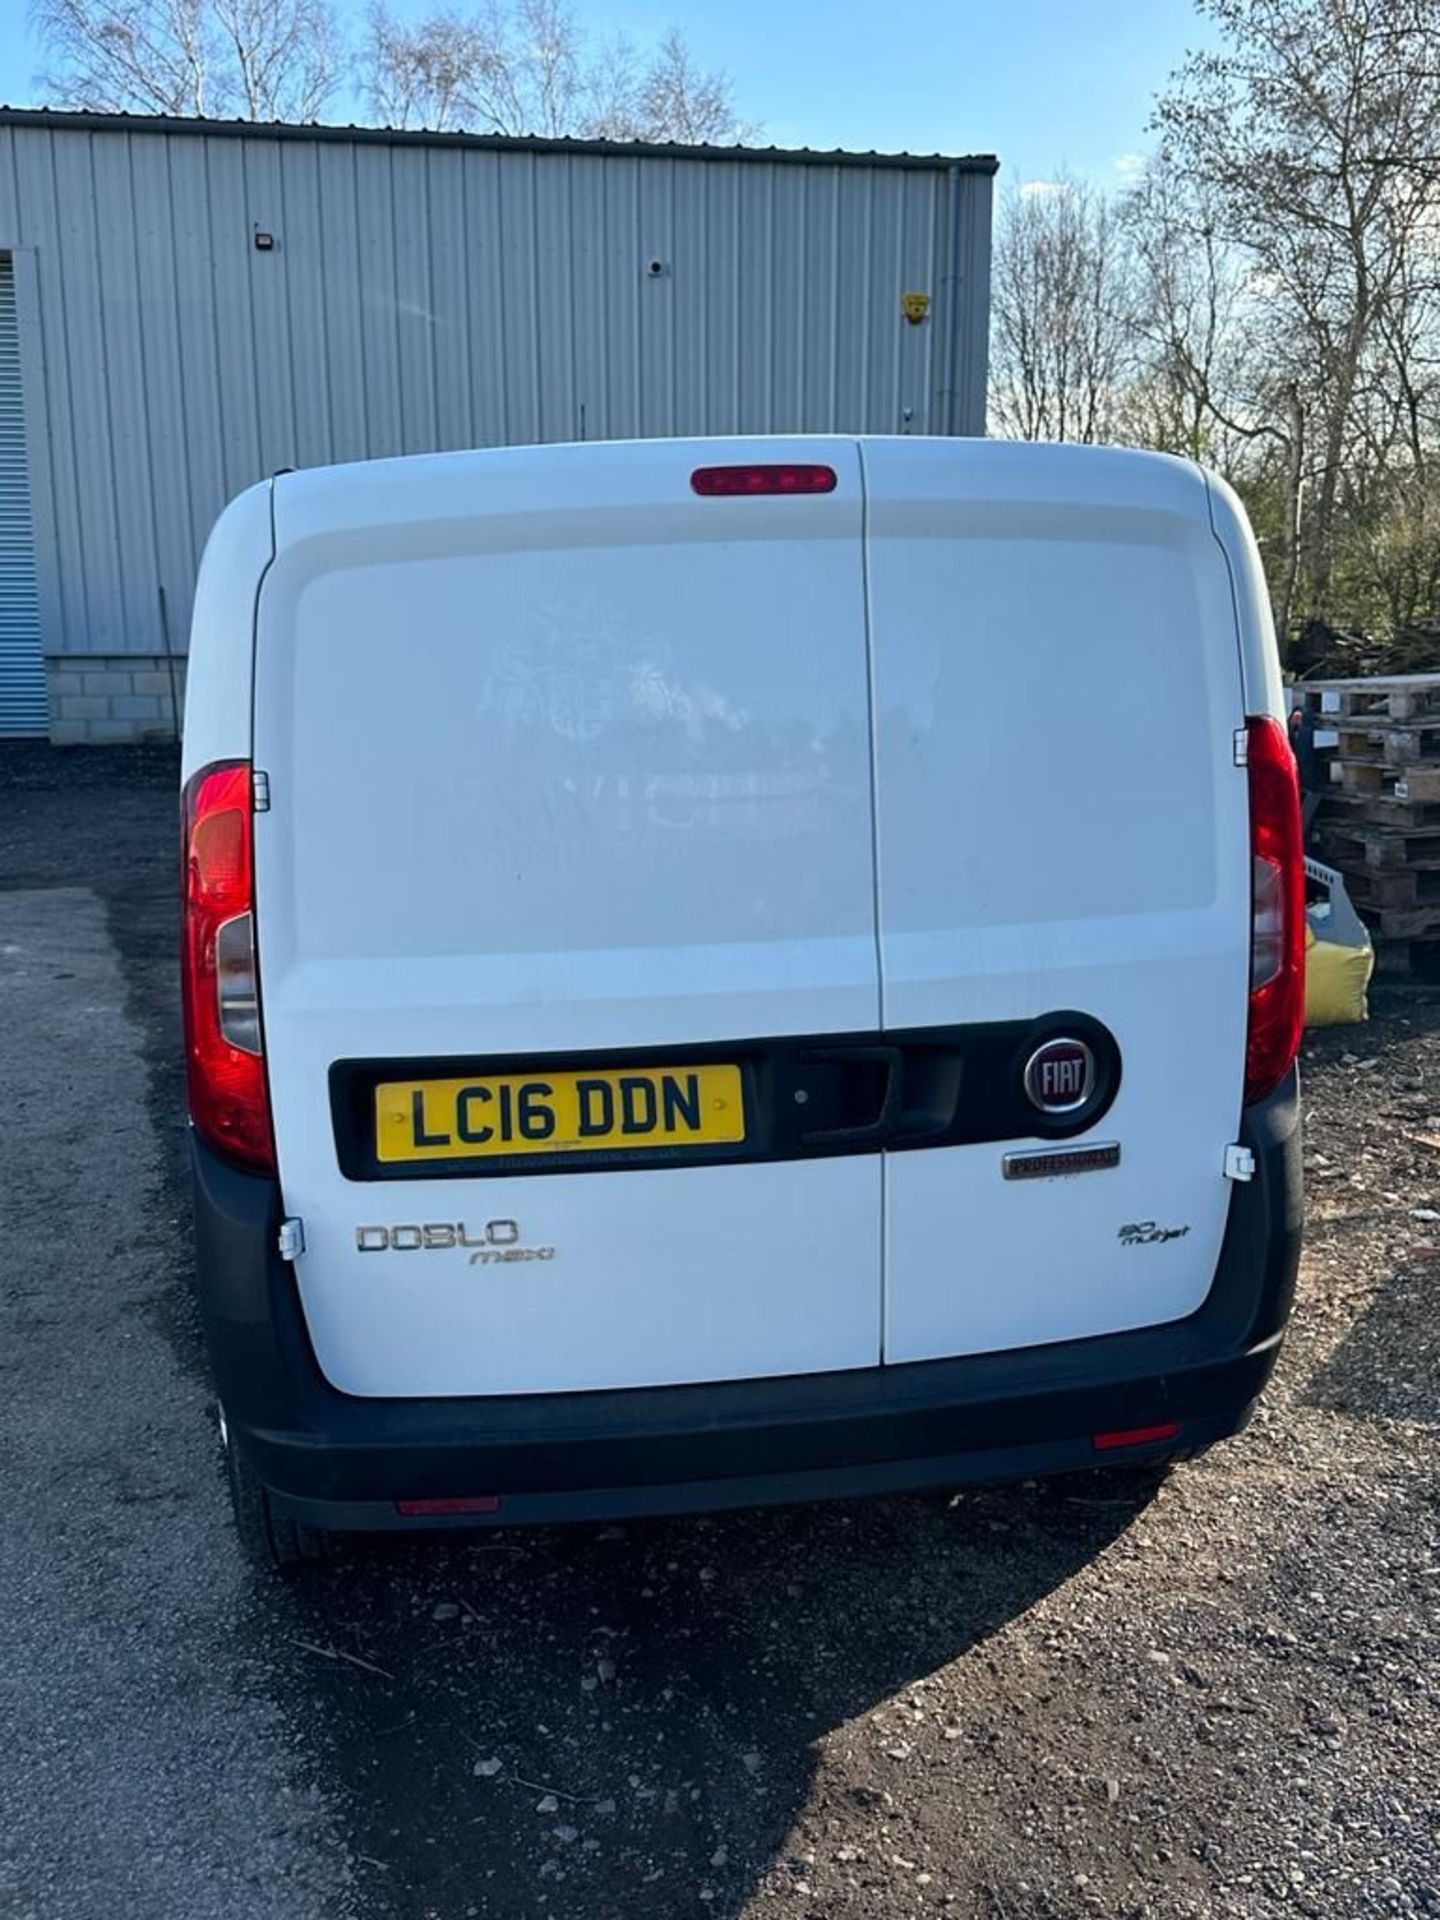 2016 16 FIAT DOBLO CREW VAN - 1.6 AUTOMATIC - ONLY 37K MILES - 5 SEATS - LWB - LC16 DDN - Image 4 of 9